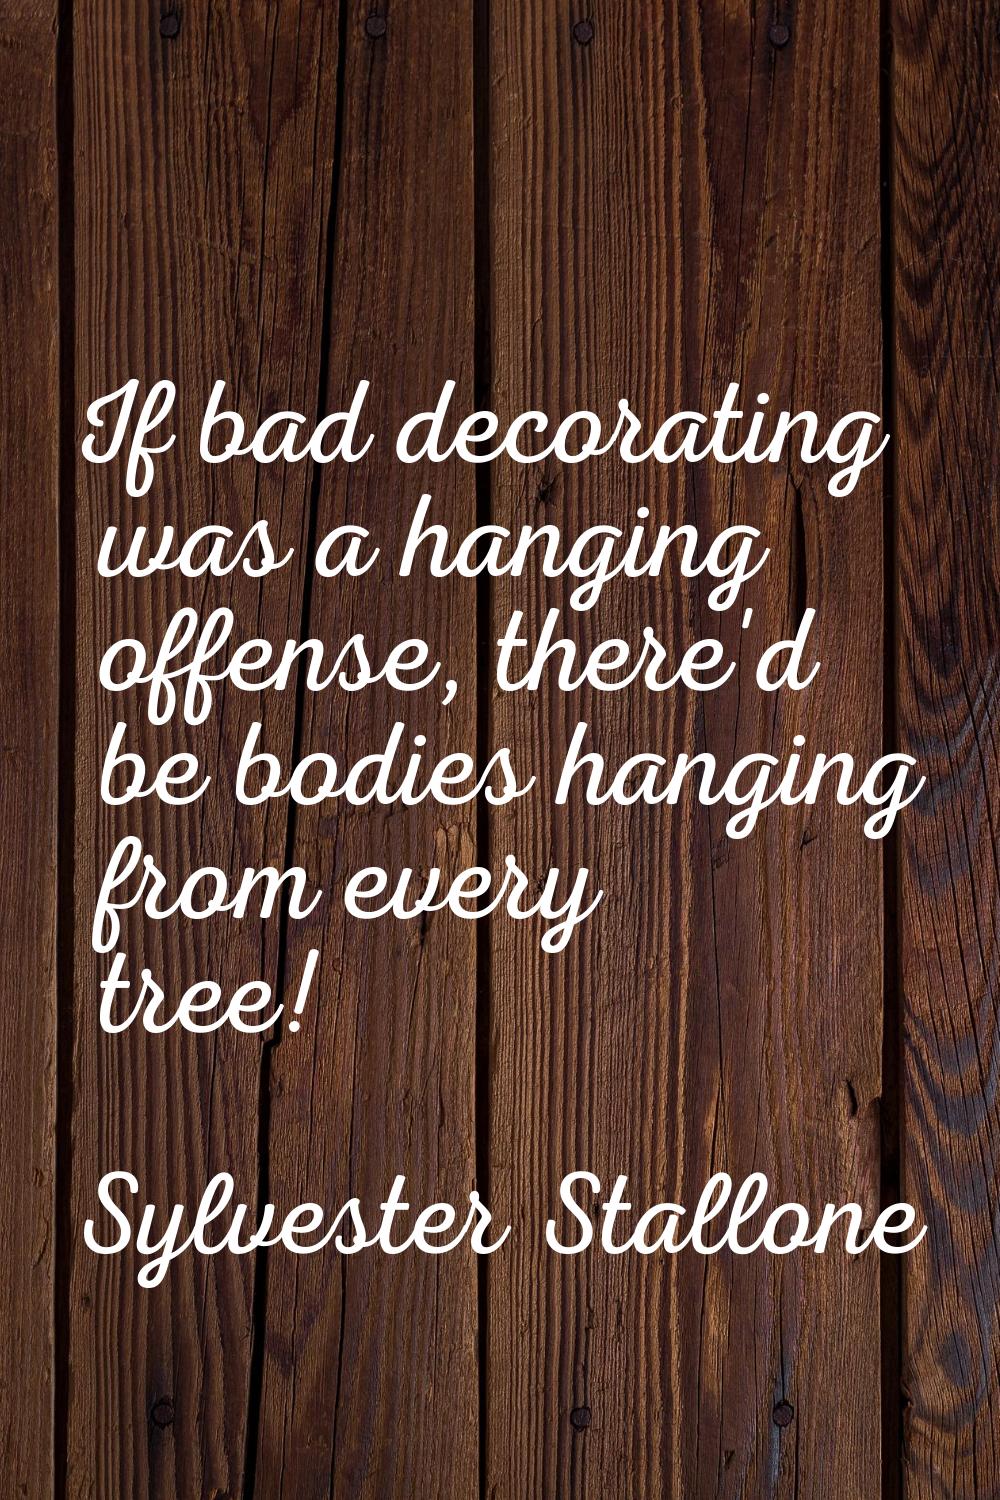 If bad decorating was a hanging offense, there'd be bodies hanging from every tree!